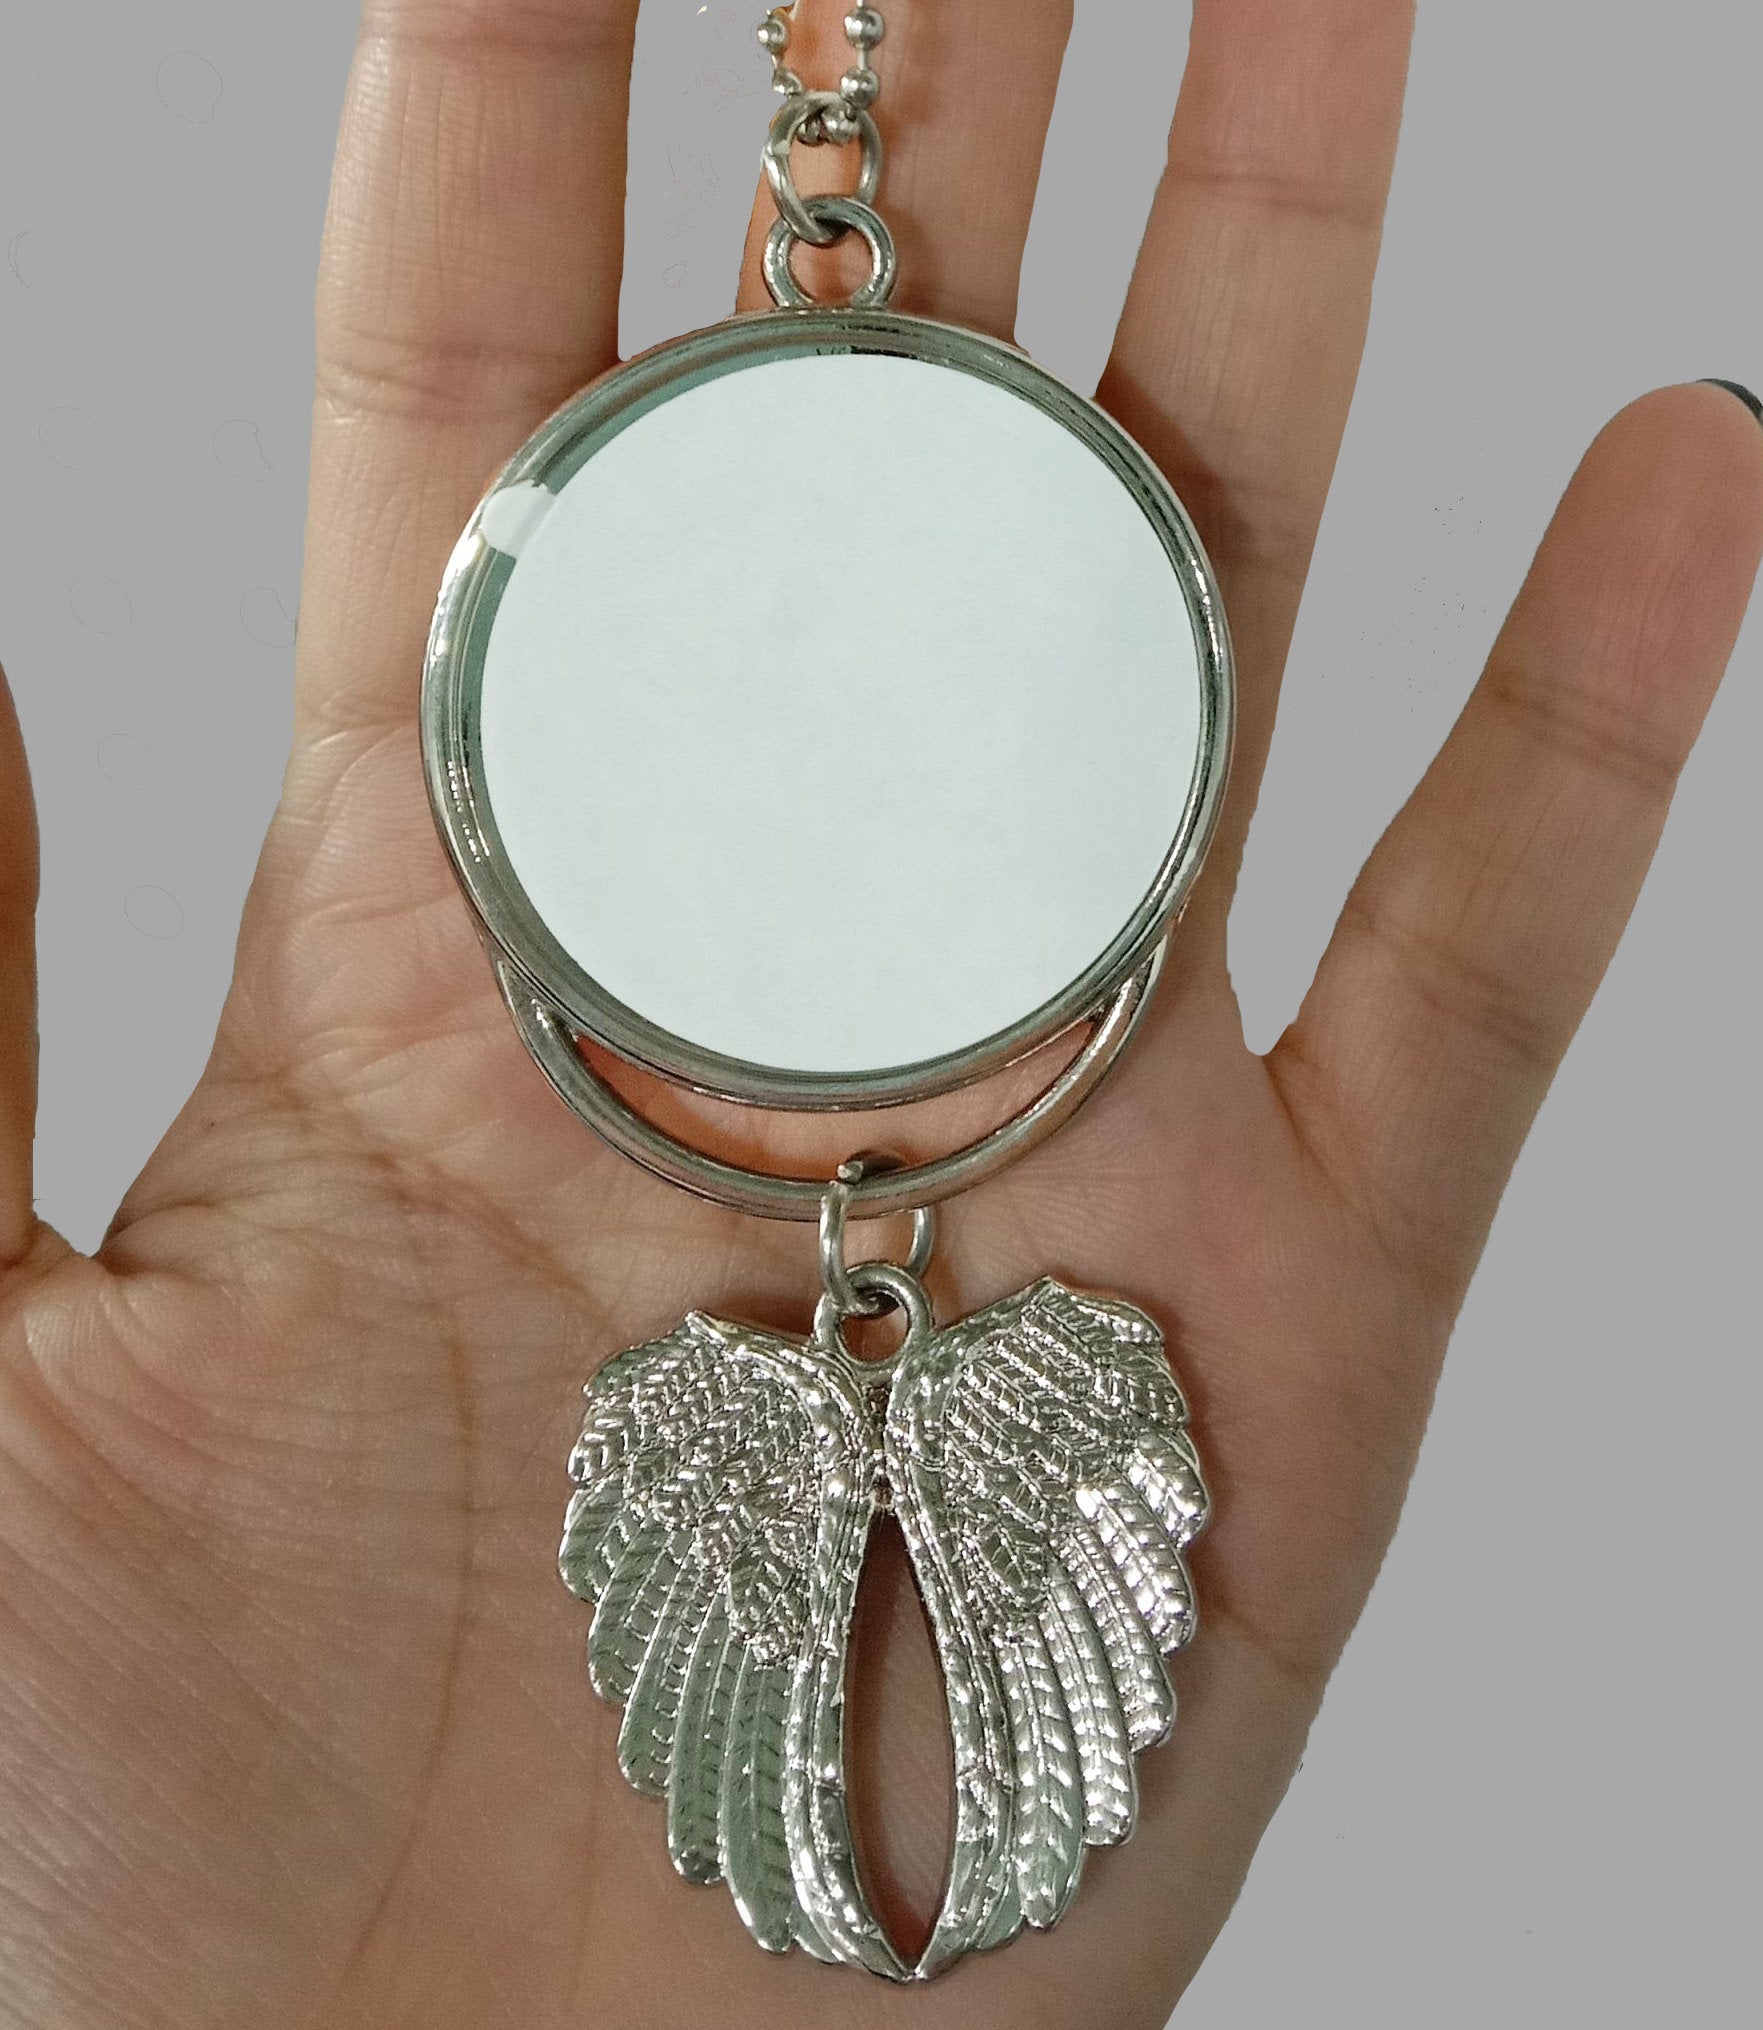  Ouhoe Car Hanging Ornament,Angel Wing Car Rearview